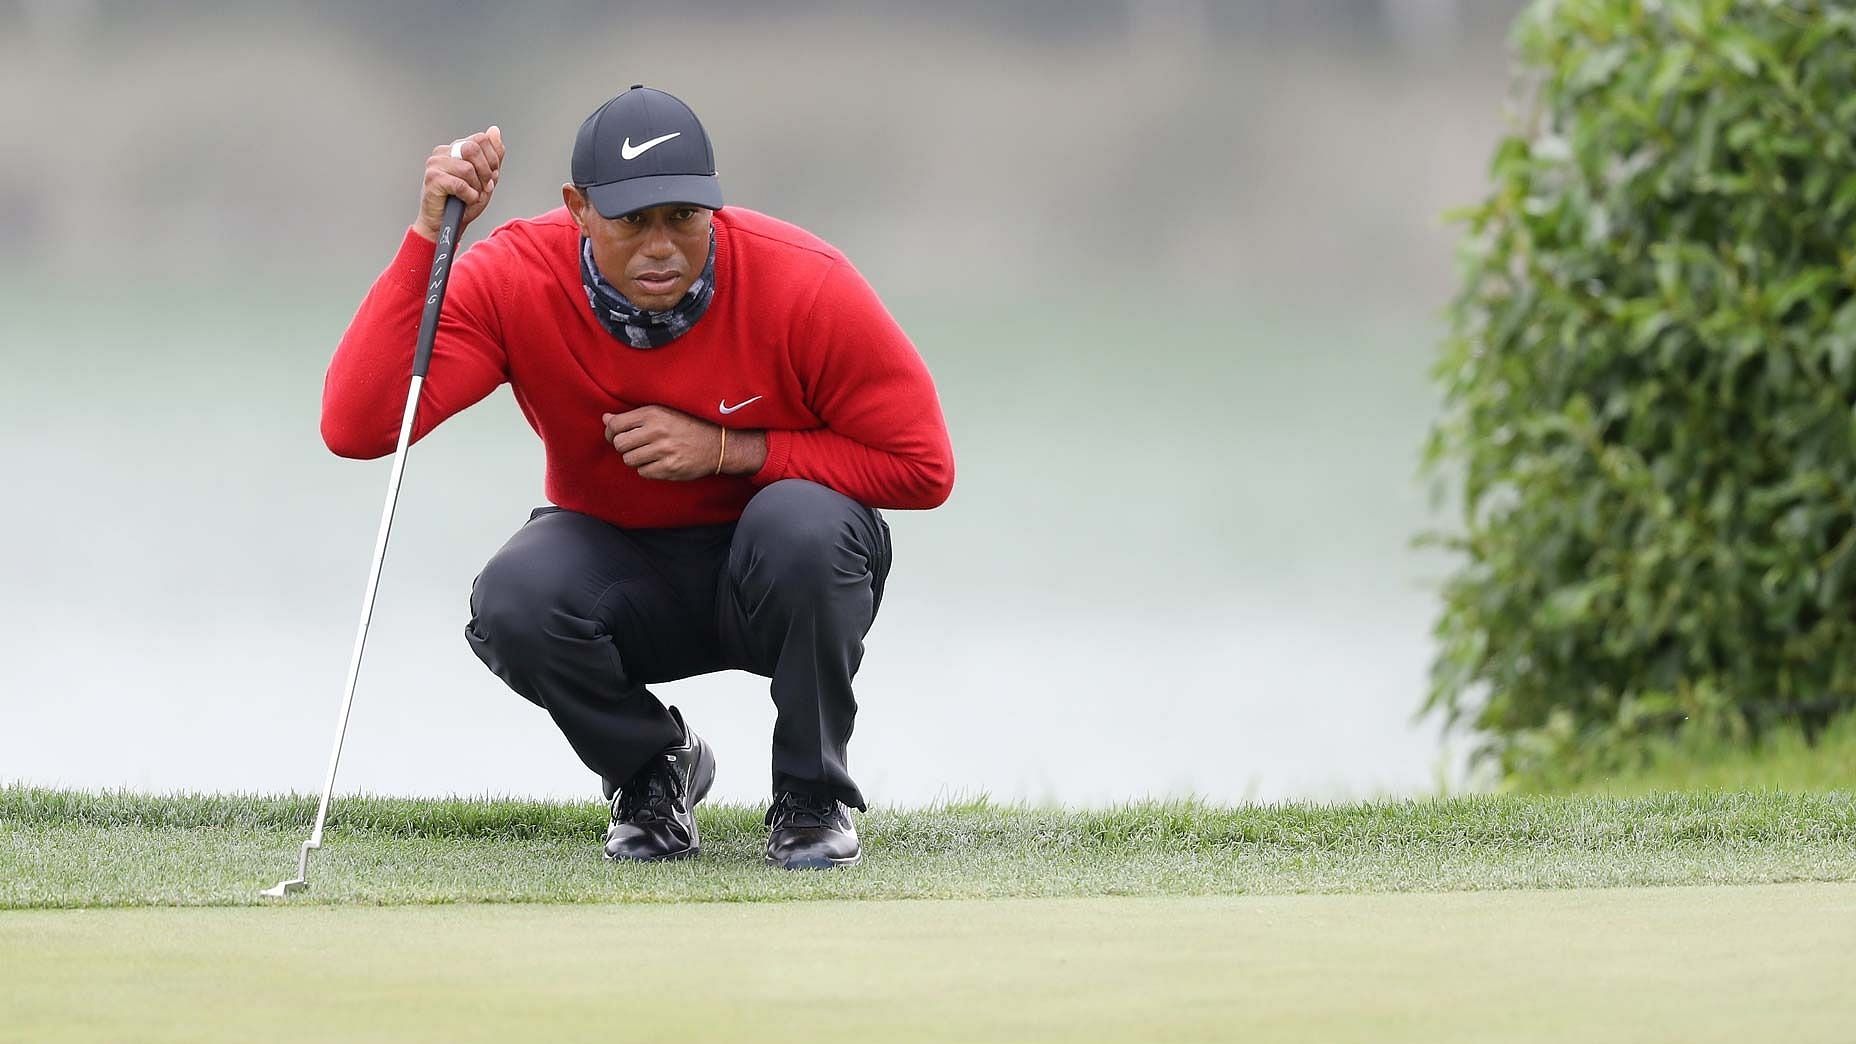 Fans have been waiting for Tiger Woods